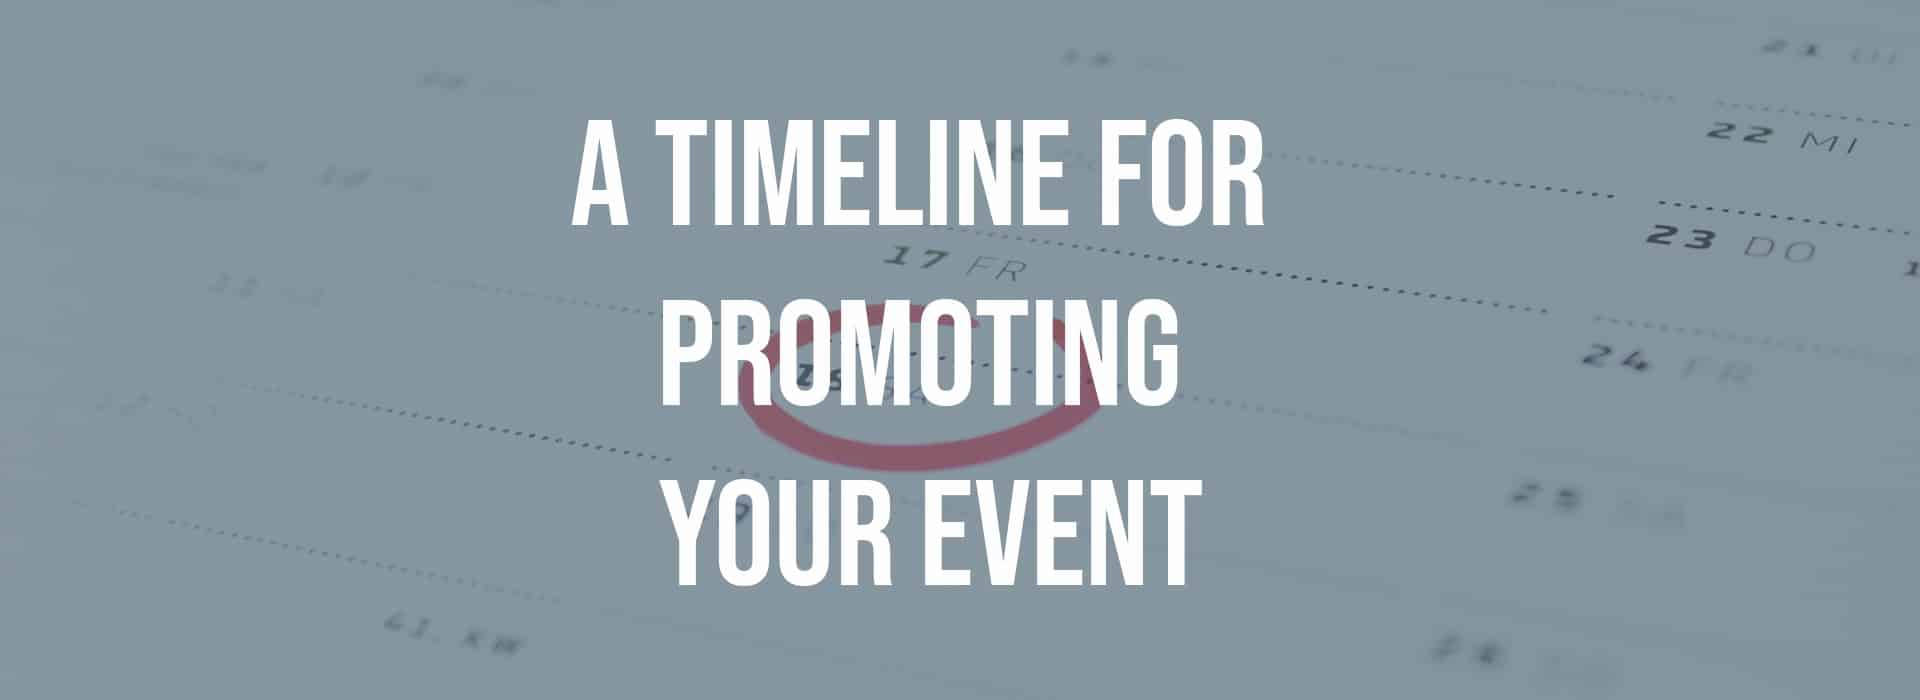 A Timeline for Promoting Your Event